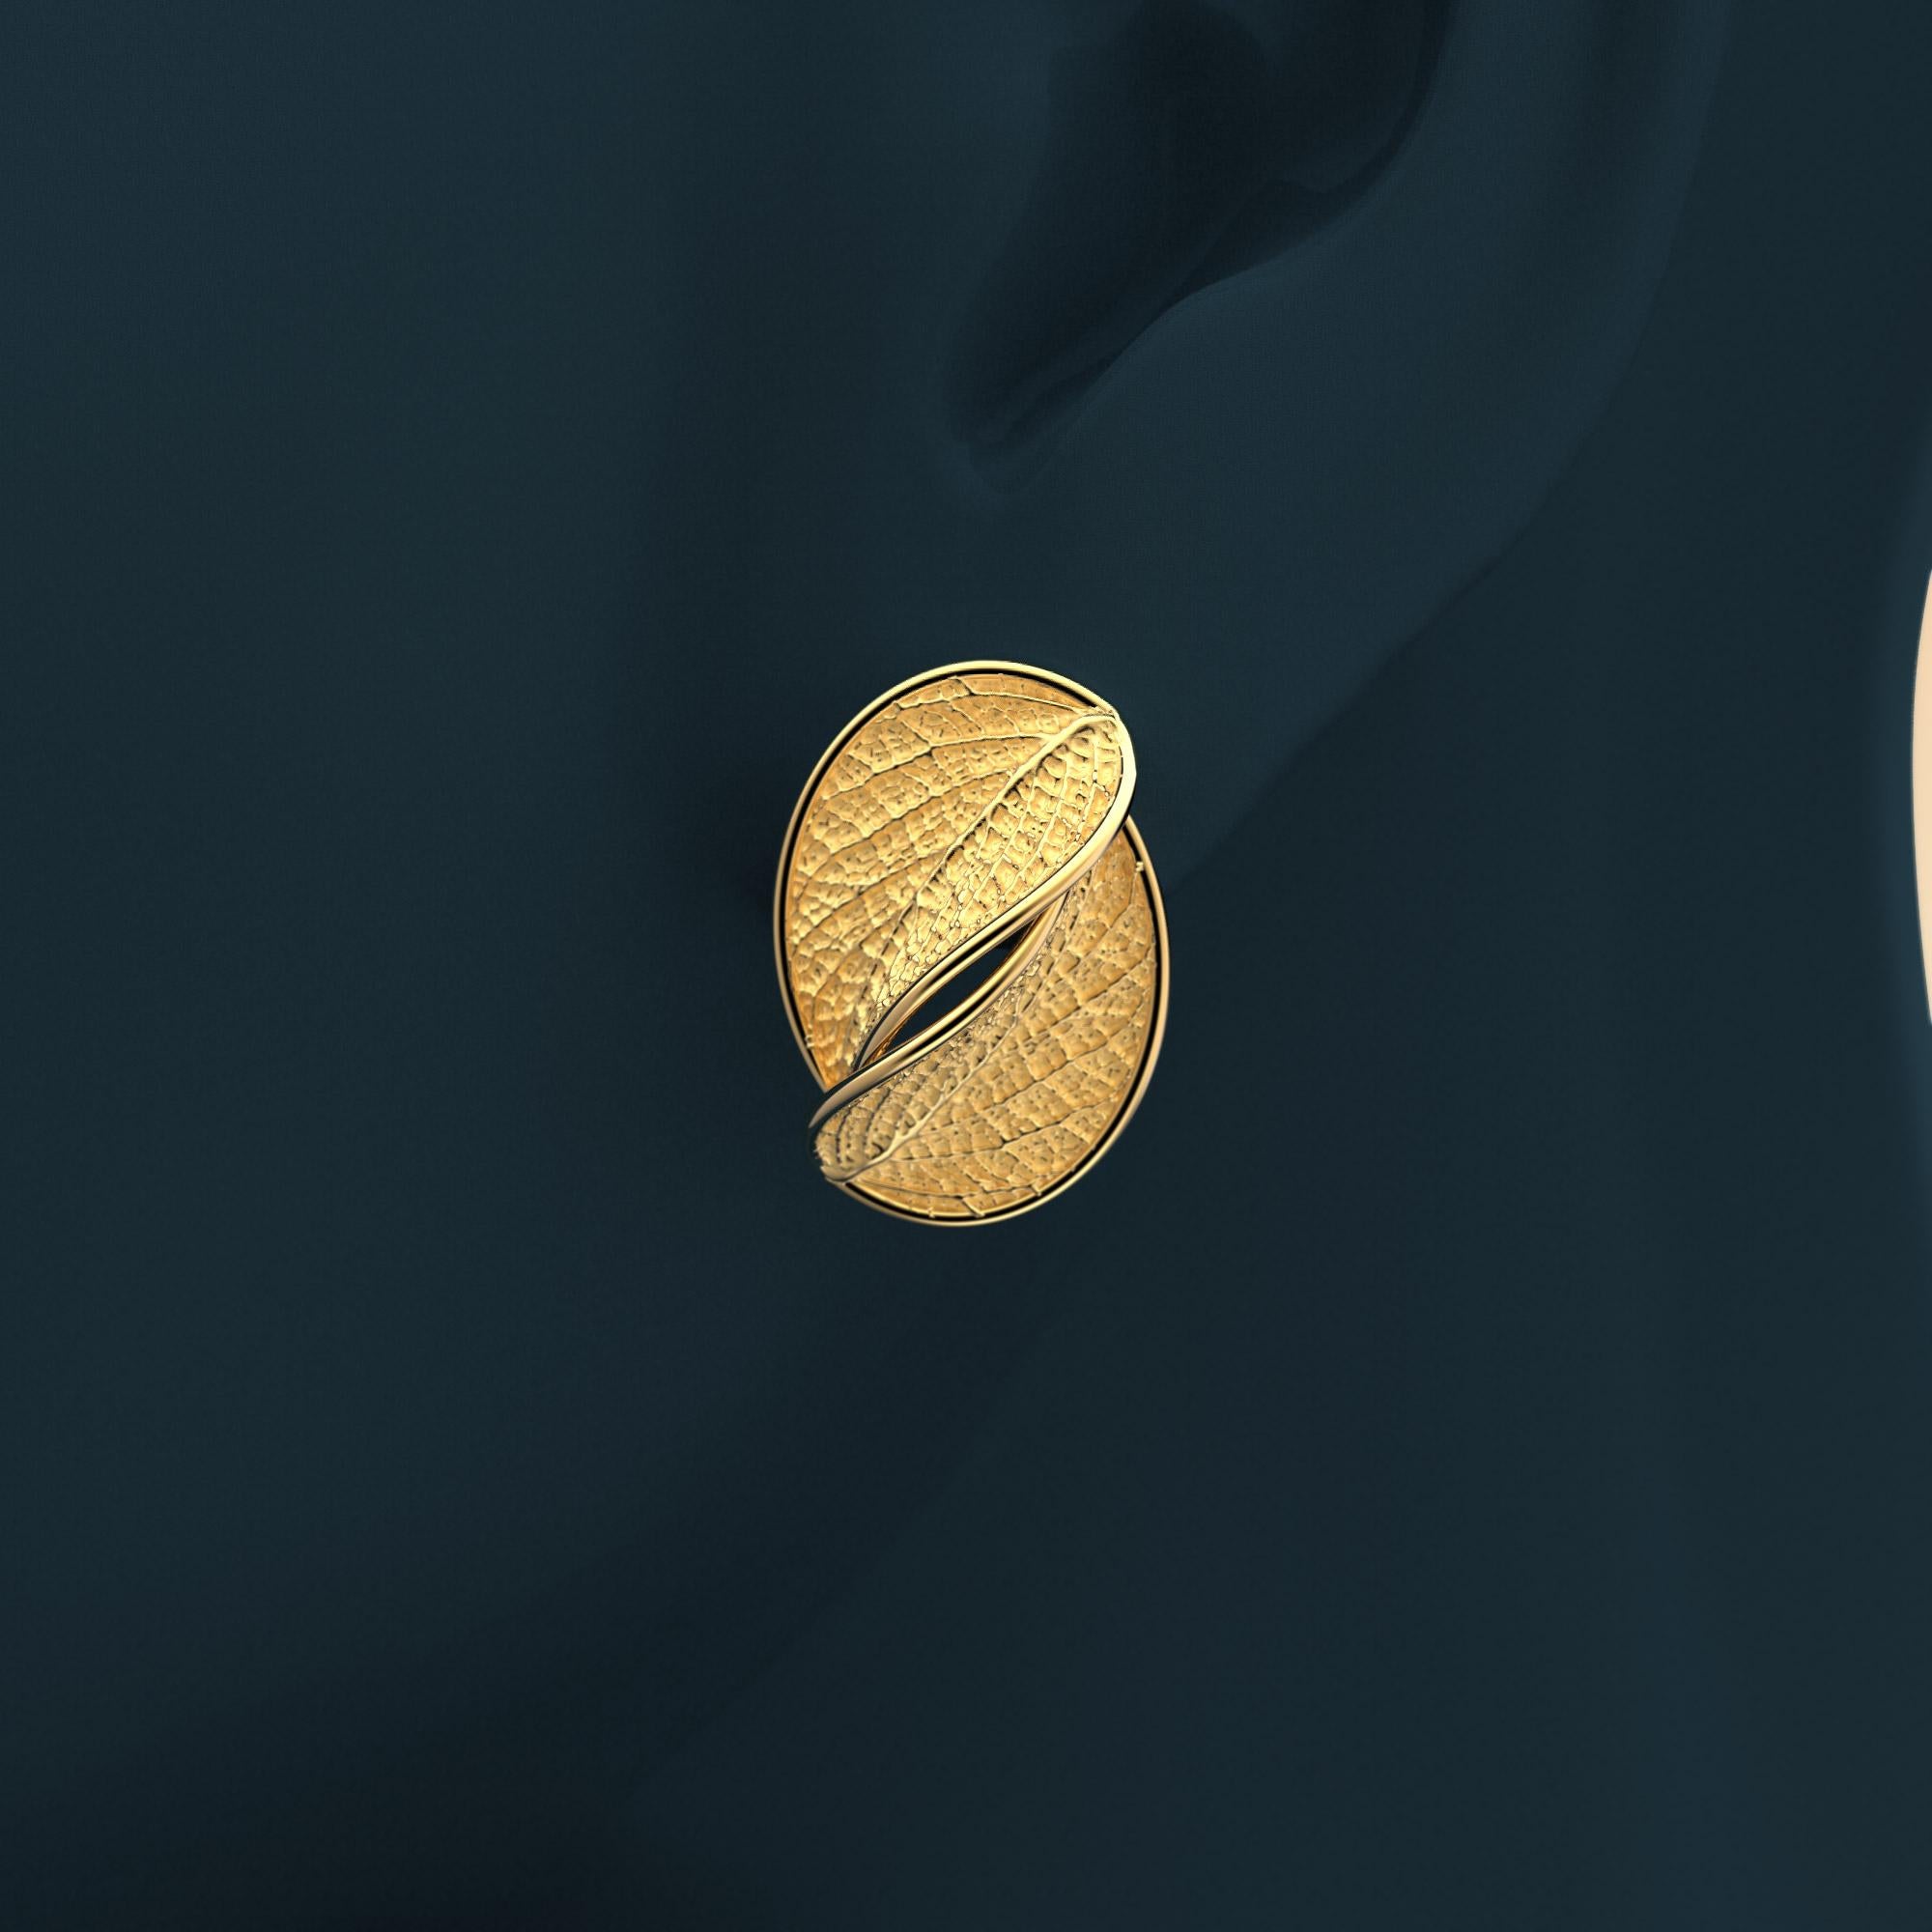 14k Gold Nature Inspired Stud Earrings with Leaf Design, Italian Fine Jewelry In New Condition For Sale In Camisano Vicentino, VI